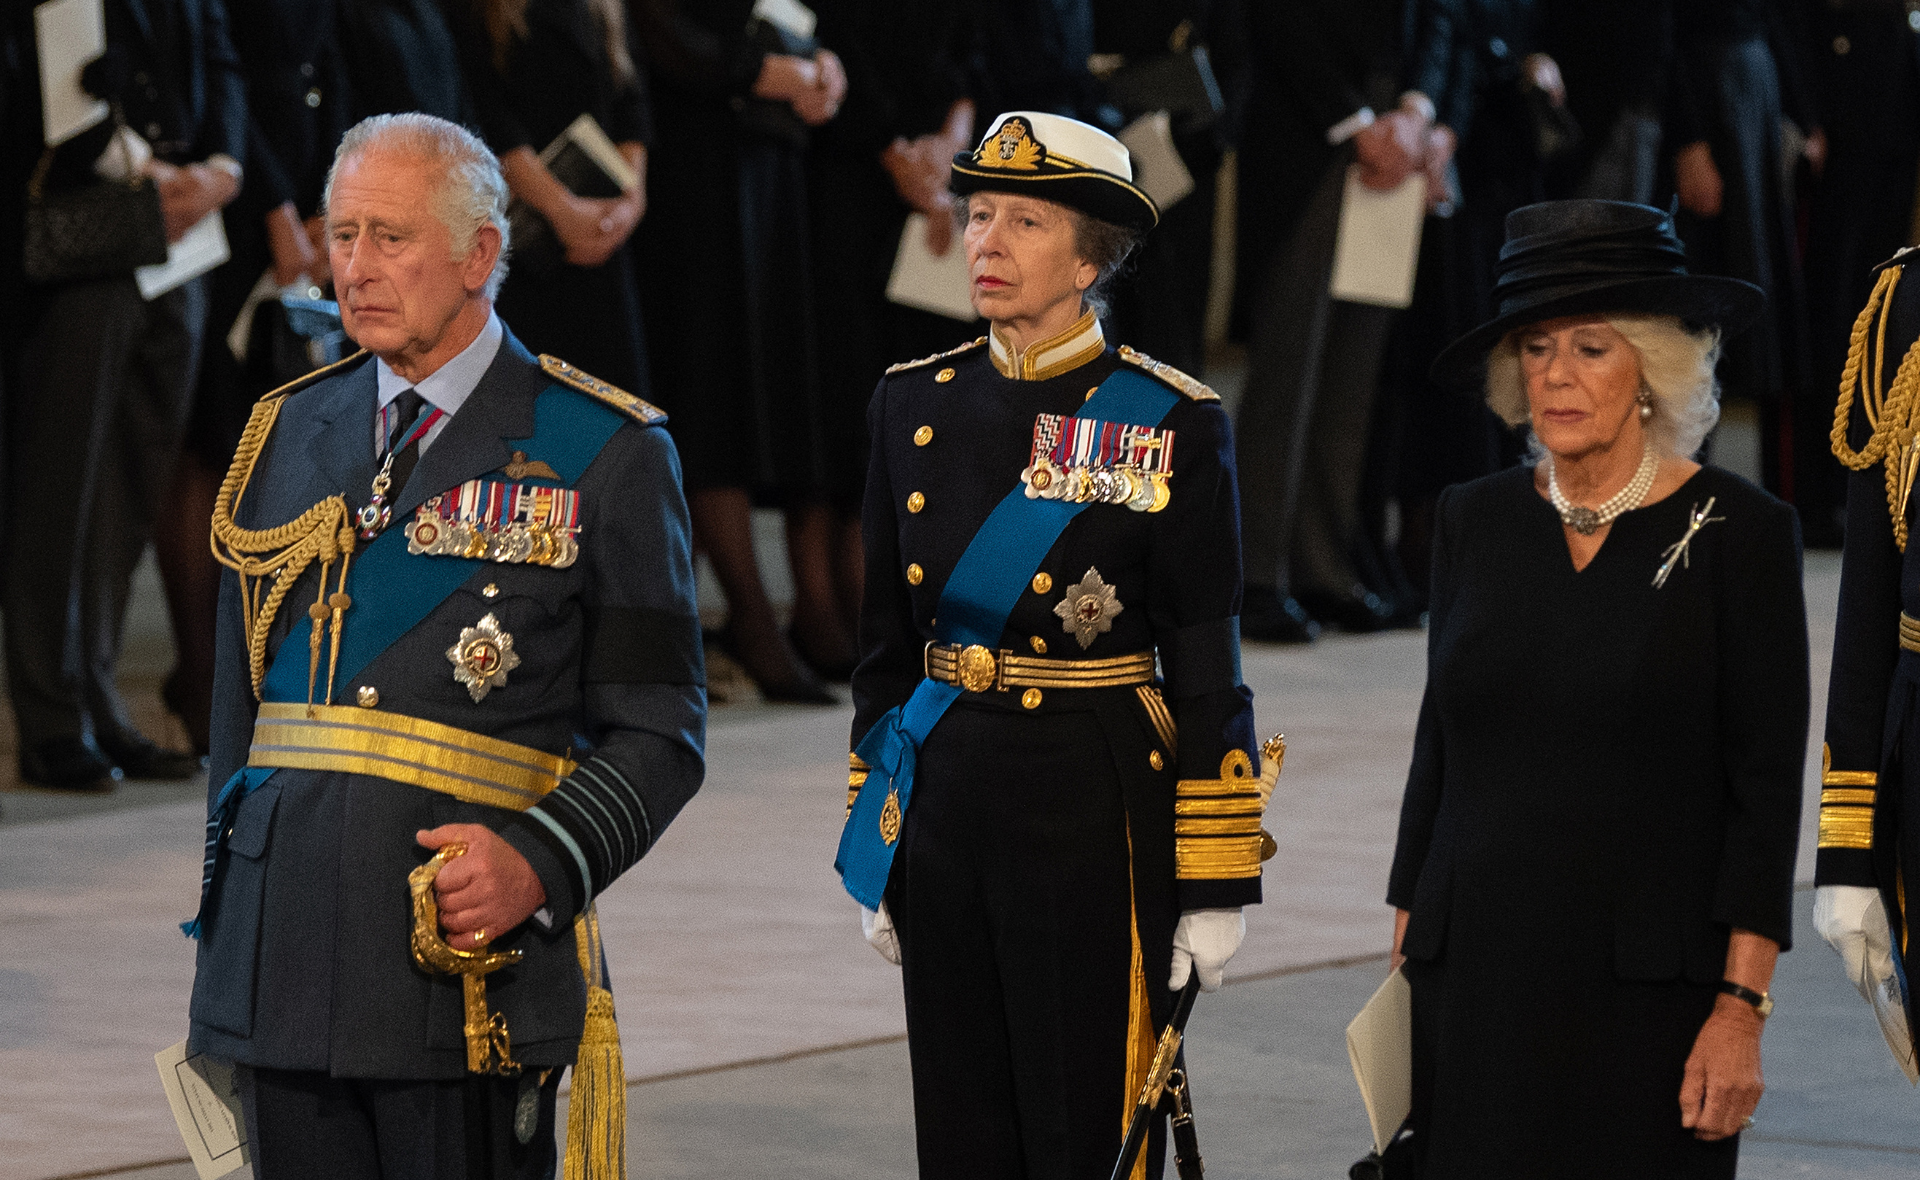 ‘Nothing will stop Anne’: Royal coronation tensions build in wake of Camilla’s title change